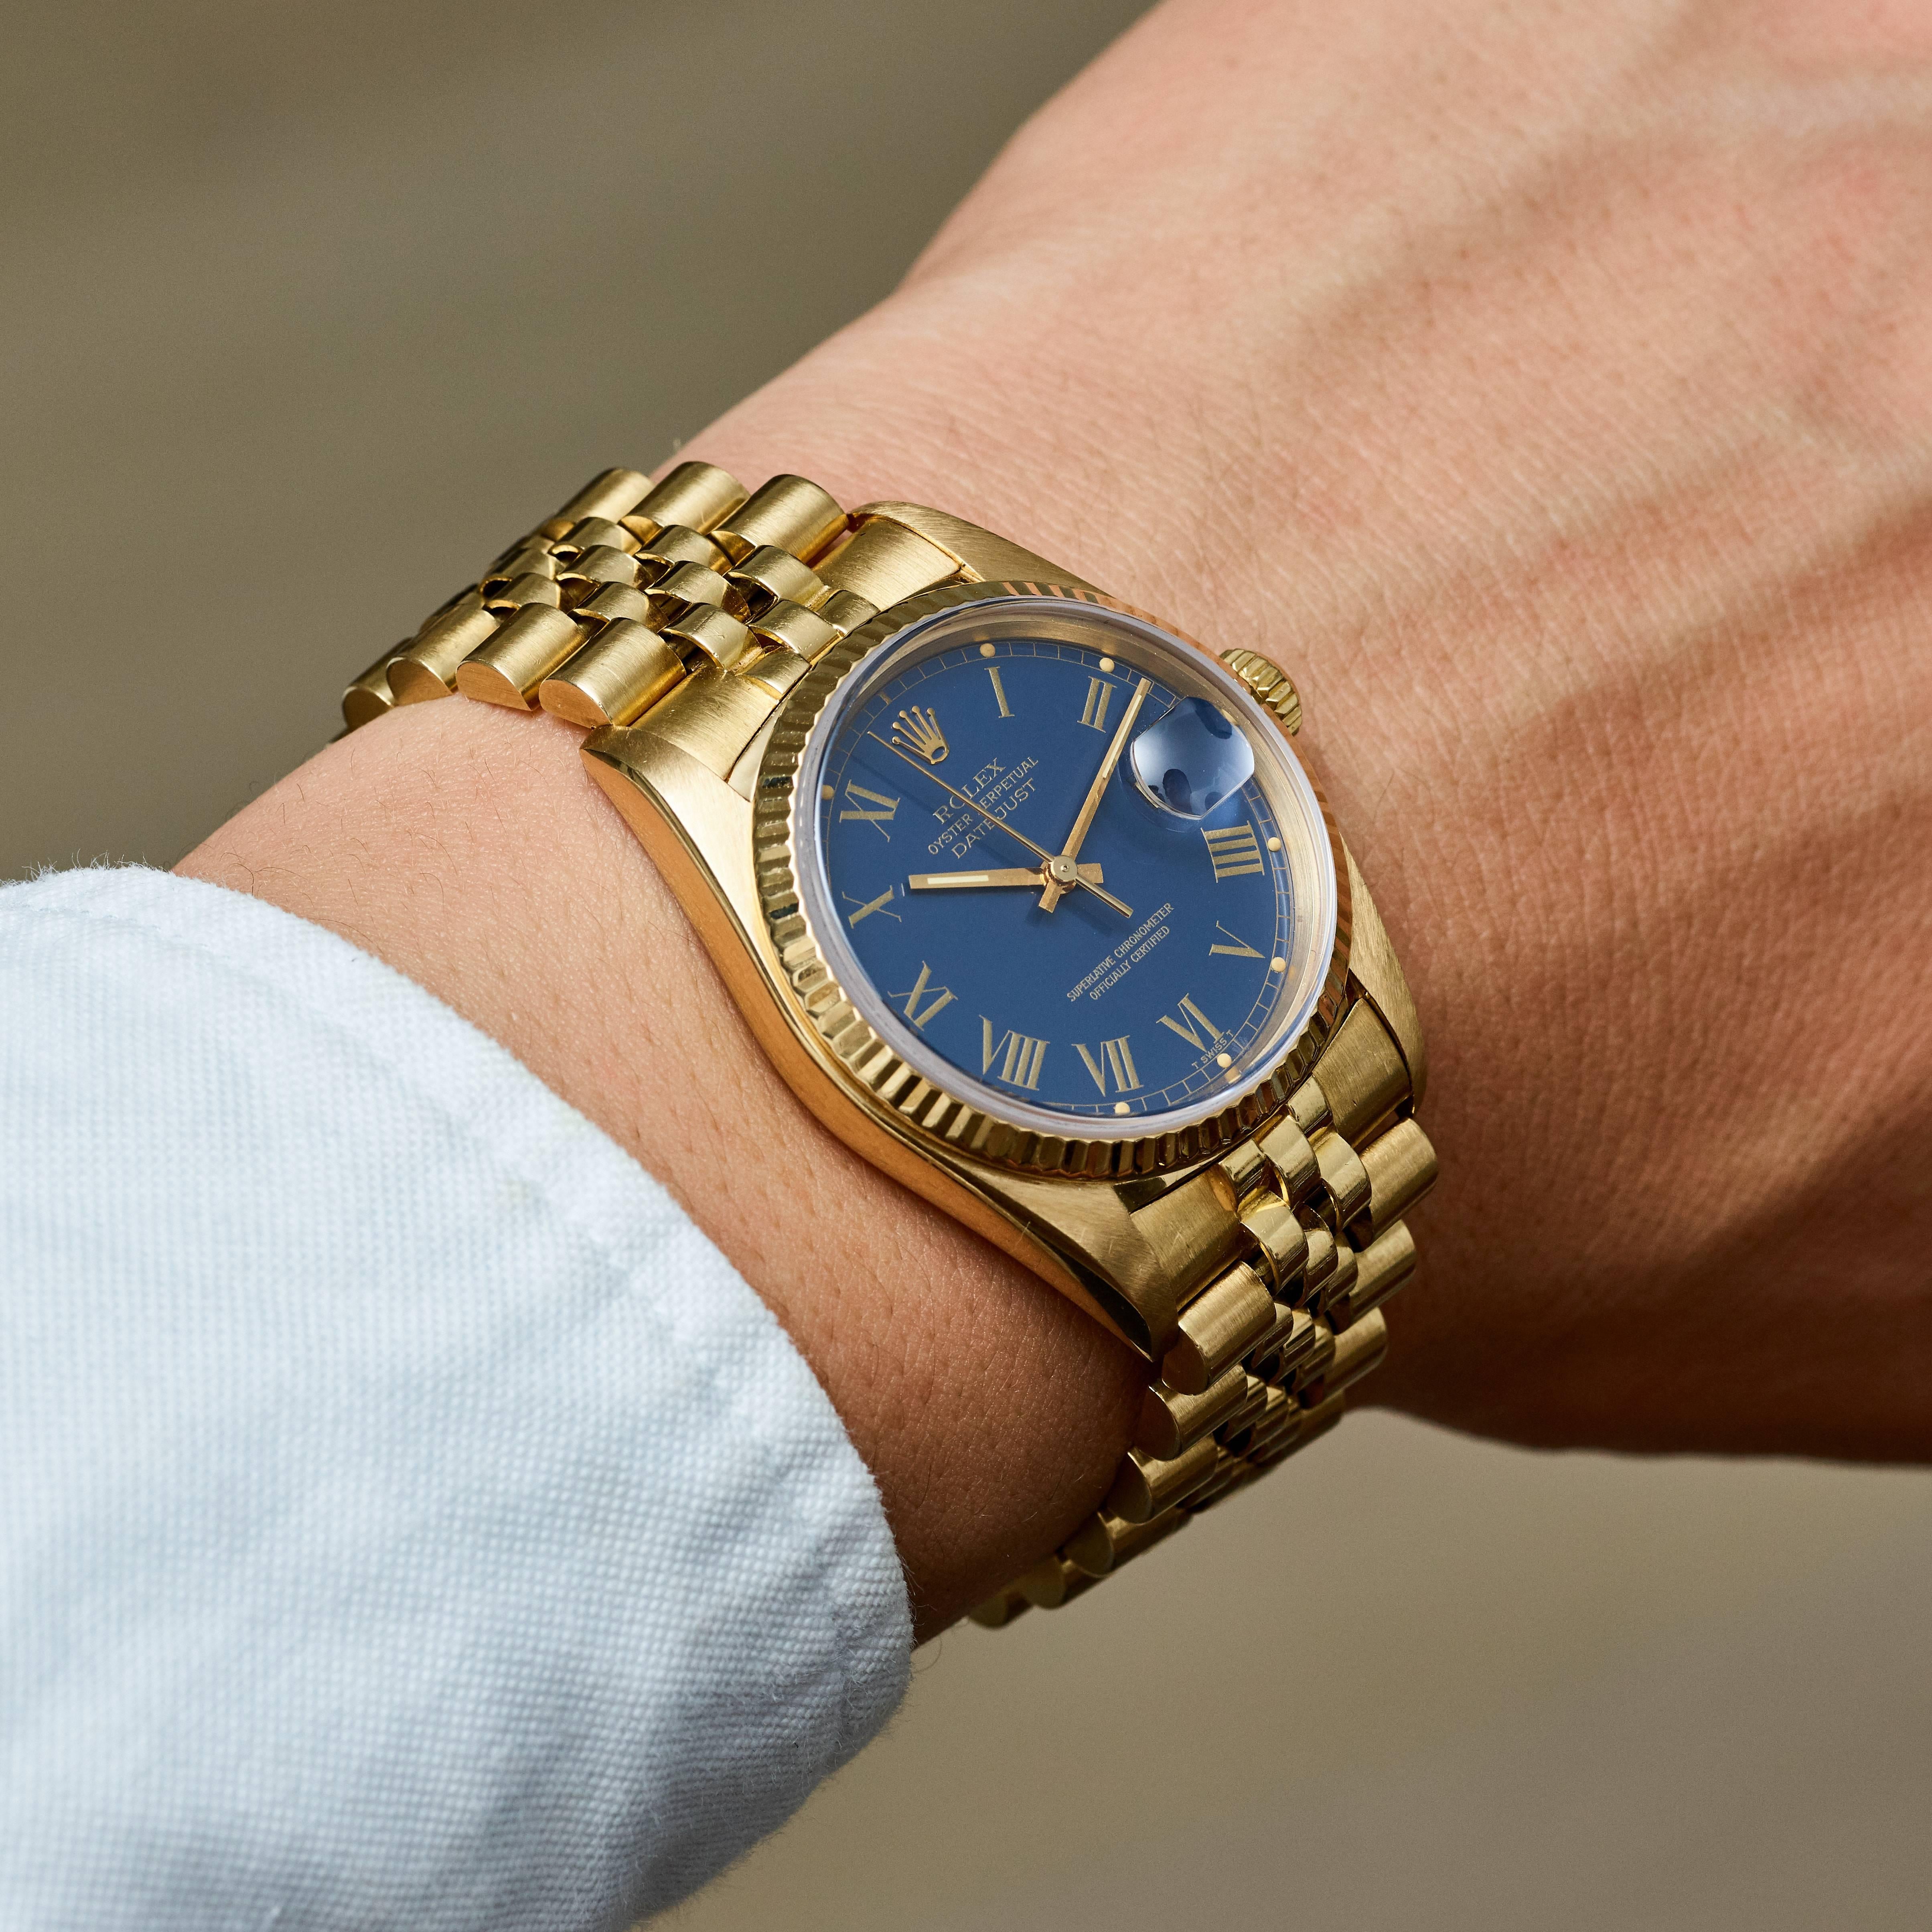 Rolex 18K Yellow Gold Oyster Perpetual Datejust Wristwatch
Factory Blue 'Buckley' Dial with  Roman Numeral Markers with Creamy Pumpkin Colored Lume Plots
18K Yellow Gold Fluted Bezel
36mm in size 
Rolex Calibre Base 3035 Automatic Quick-Set